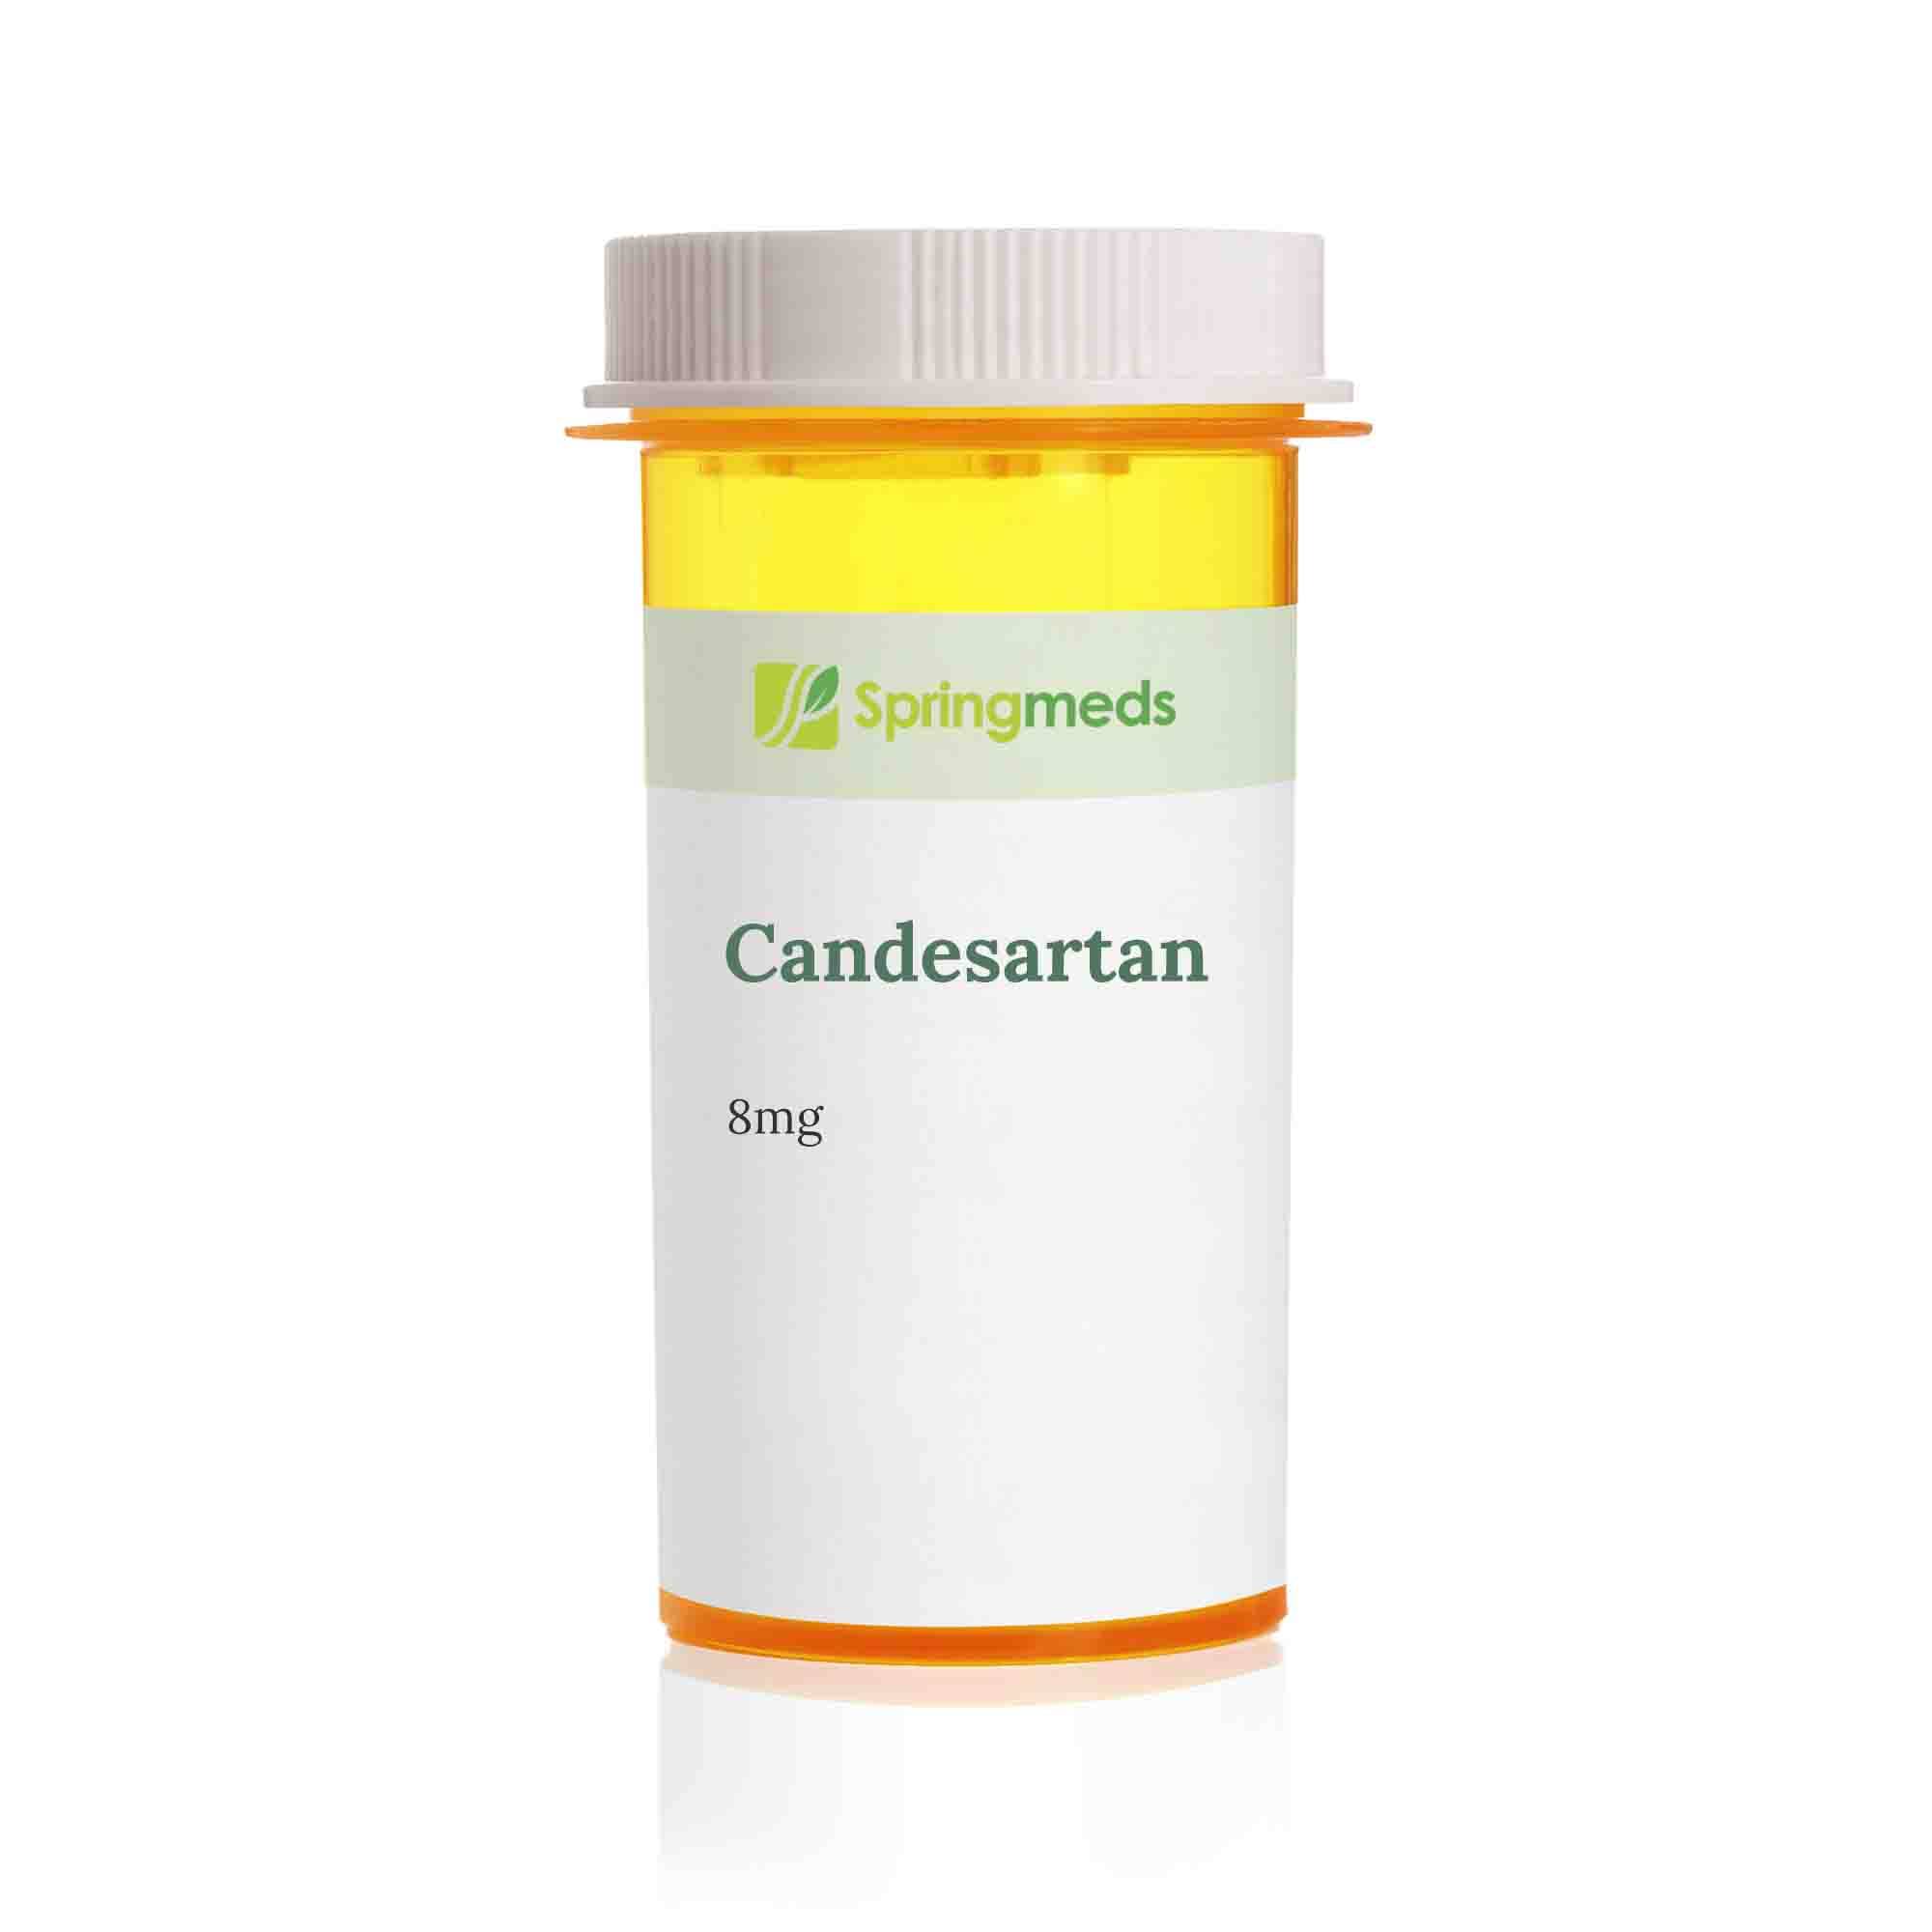 Candesartan 8mg 30.0 Tablets (generic Equivalent to Atacand)